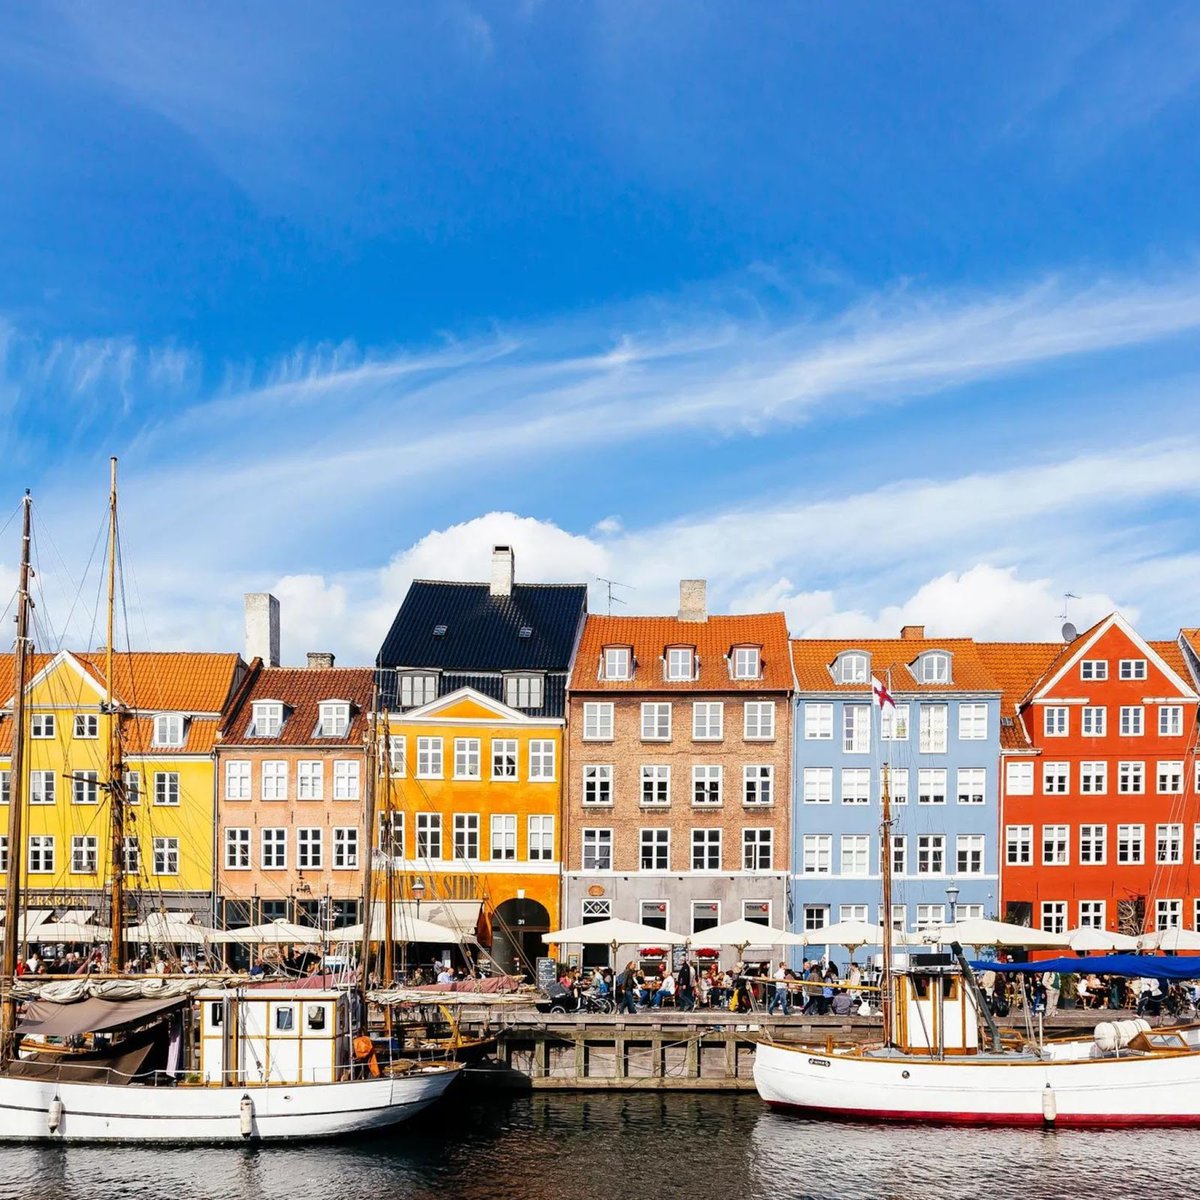 Experience the magic of Copenhagen as you navigate bureaucracy, uncover hidden neighborhoods, and embrace Danish culture. 
Start your journey to a fulfilling life in Denmark's capital today! 🌆
--
expaty.com/moving-to-cope…
.
#copenhagen #denmark #expatlife #bureaucracy